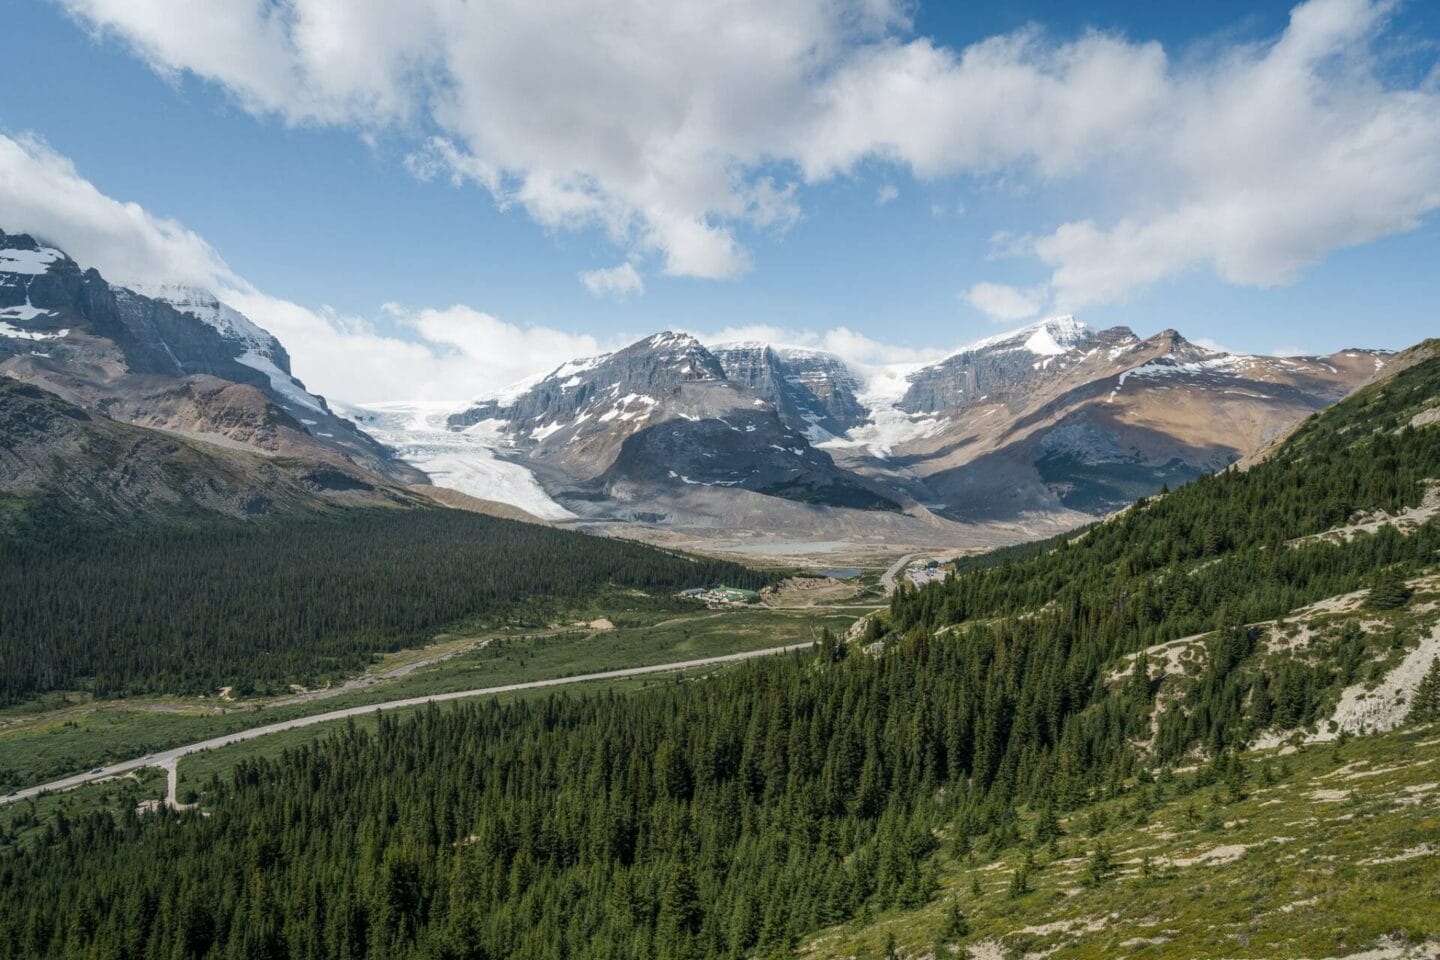 Hiking in Icefields Parkway